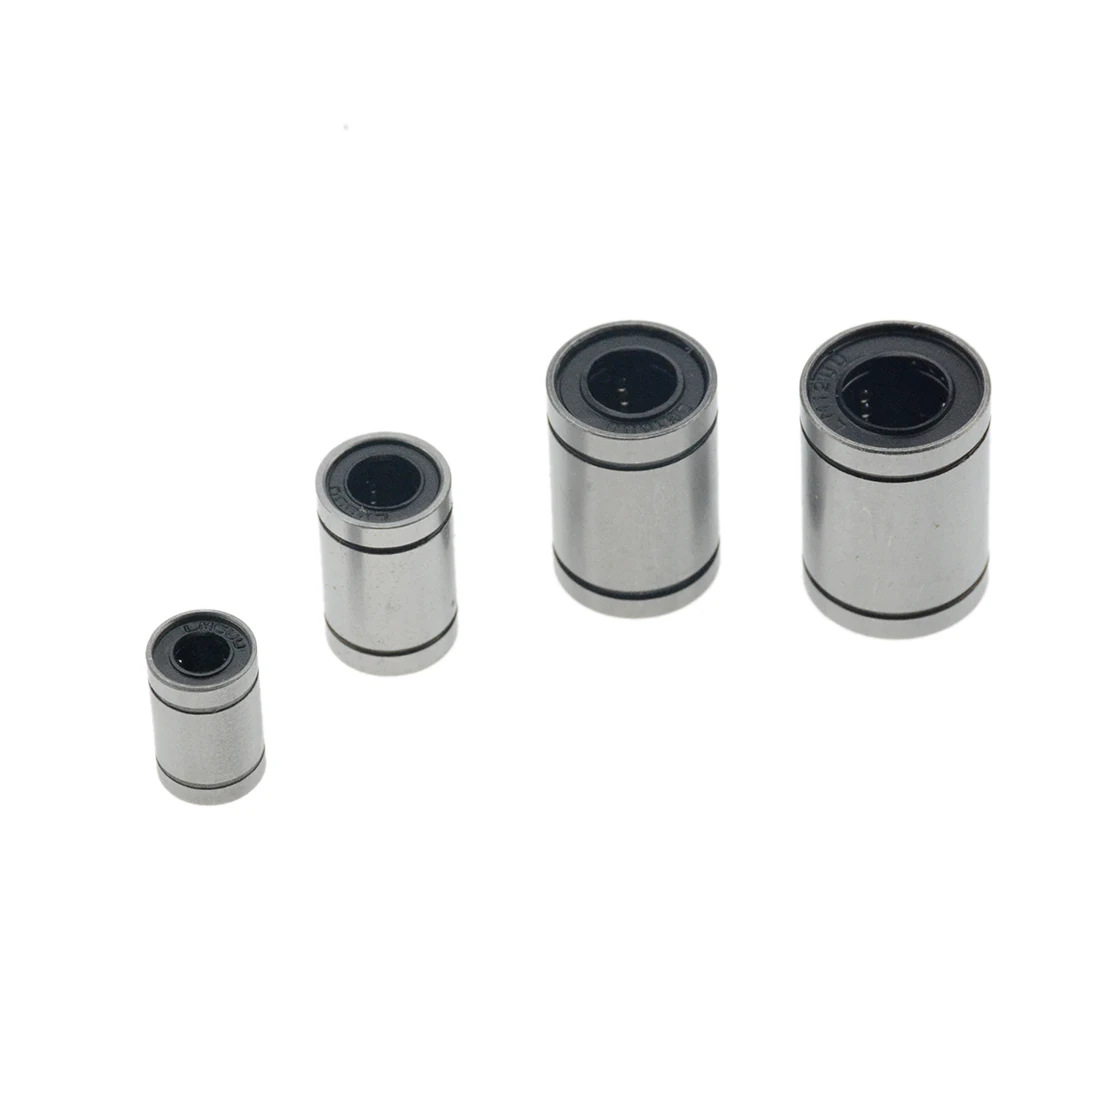 

LM8UU LM10UU LM16UU LM6UU LM12UU LM3UU Linear Bushing 8mm CNC Linear Bearings for Rods Liner Rail Linear Shaft parts